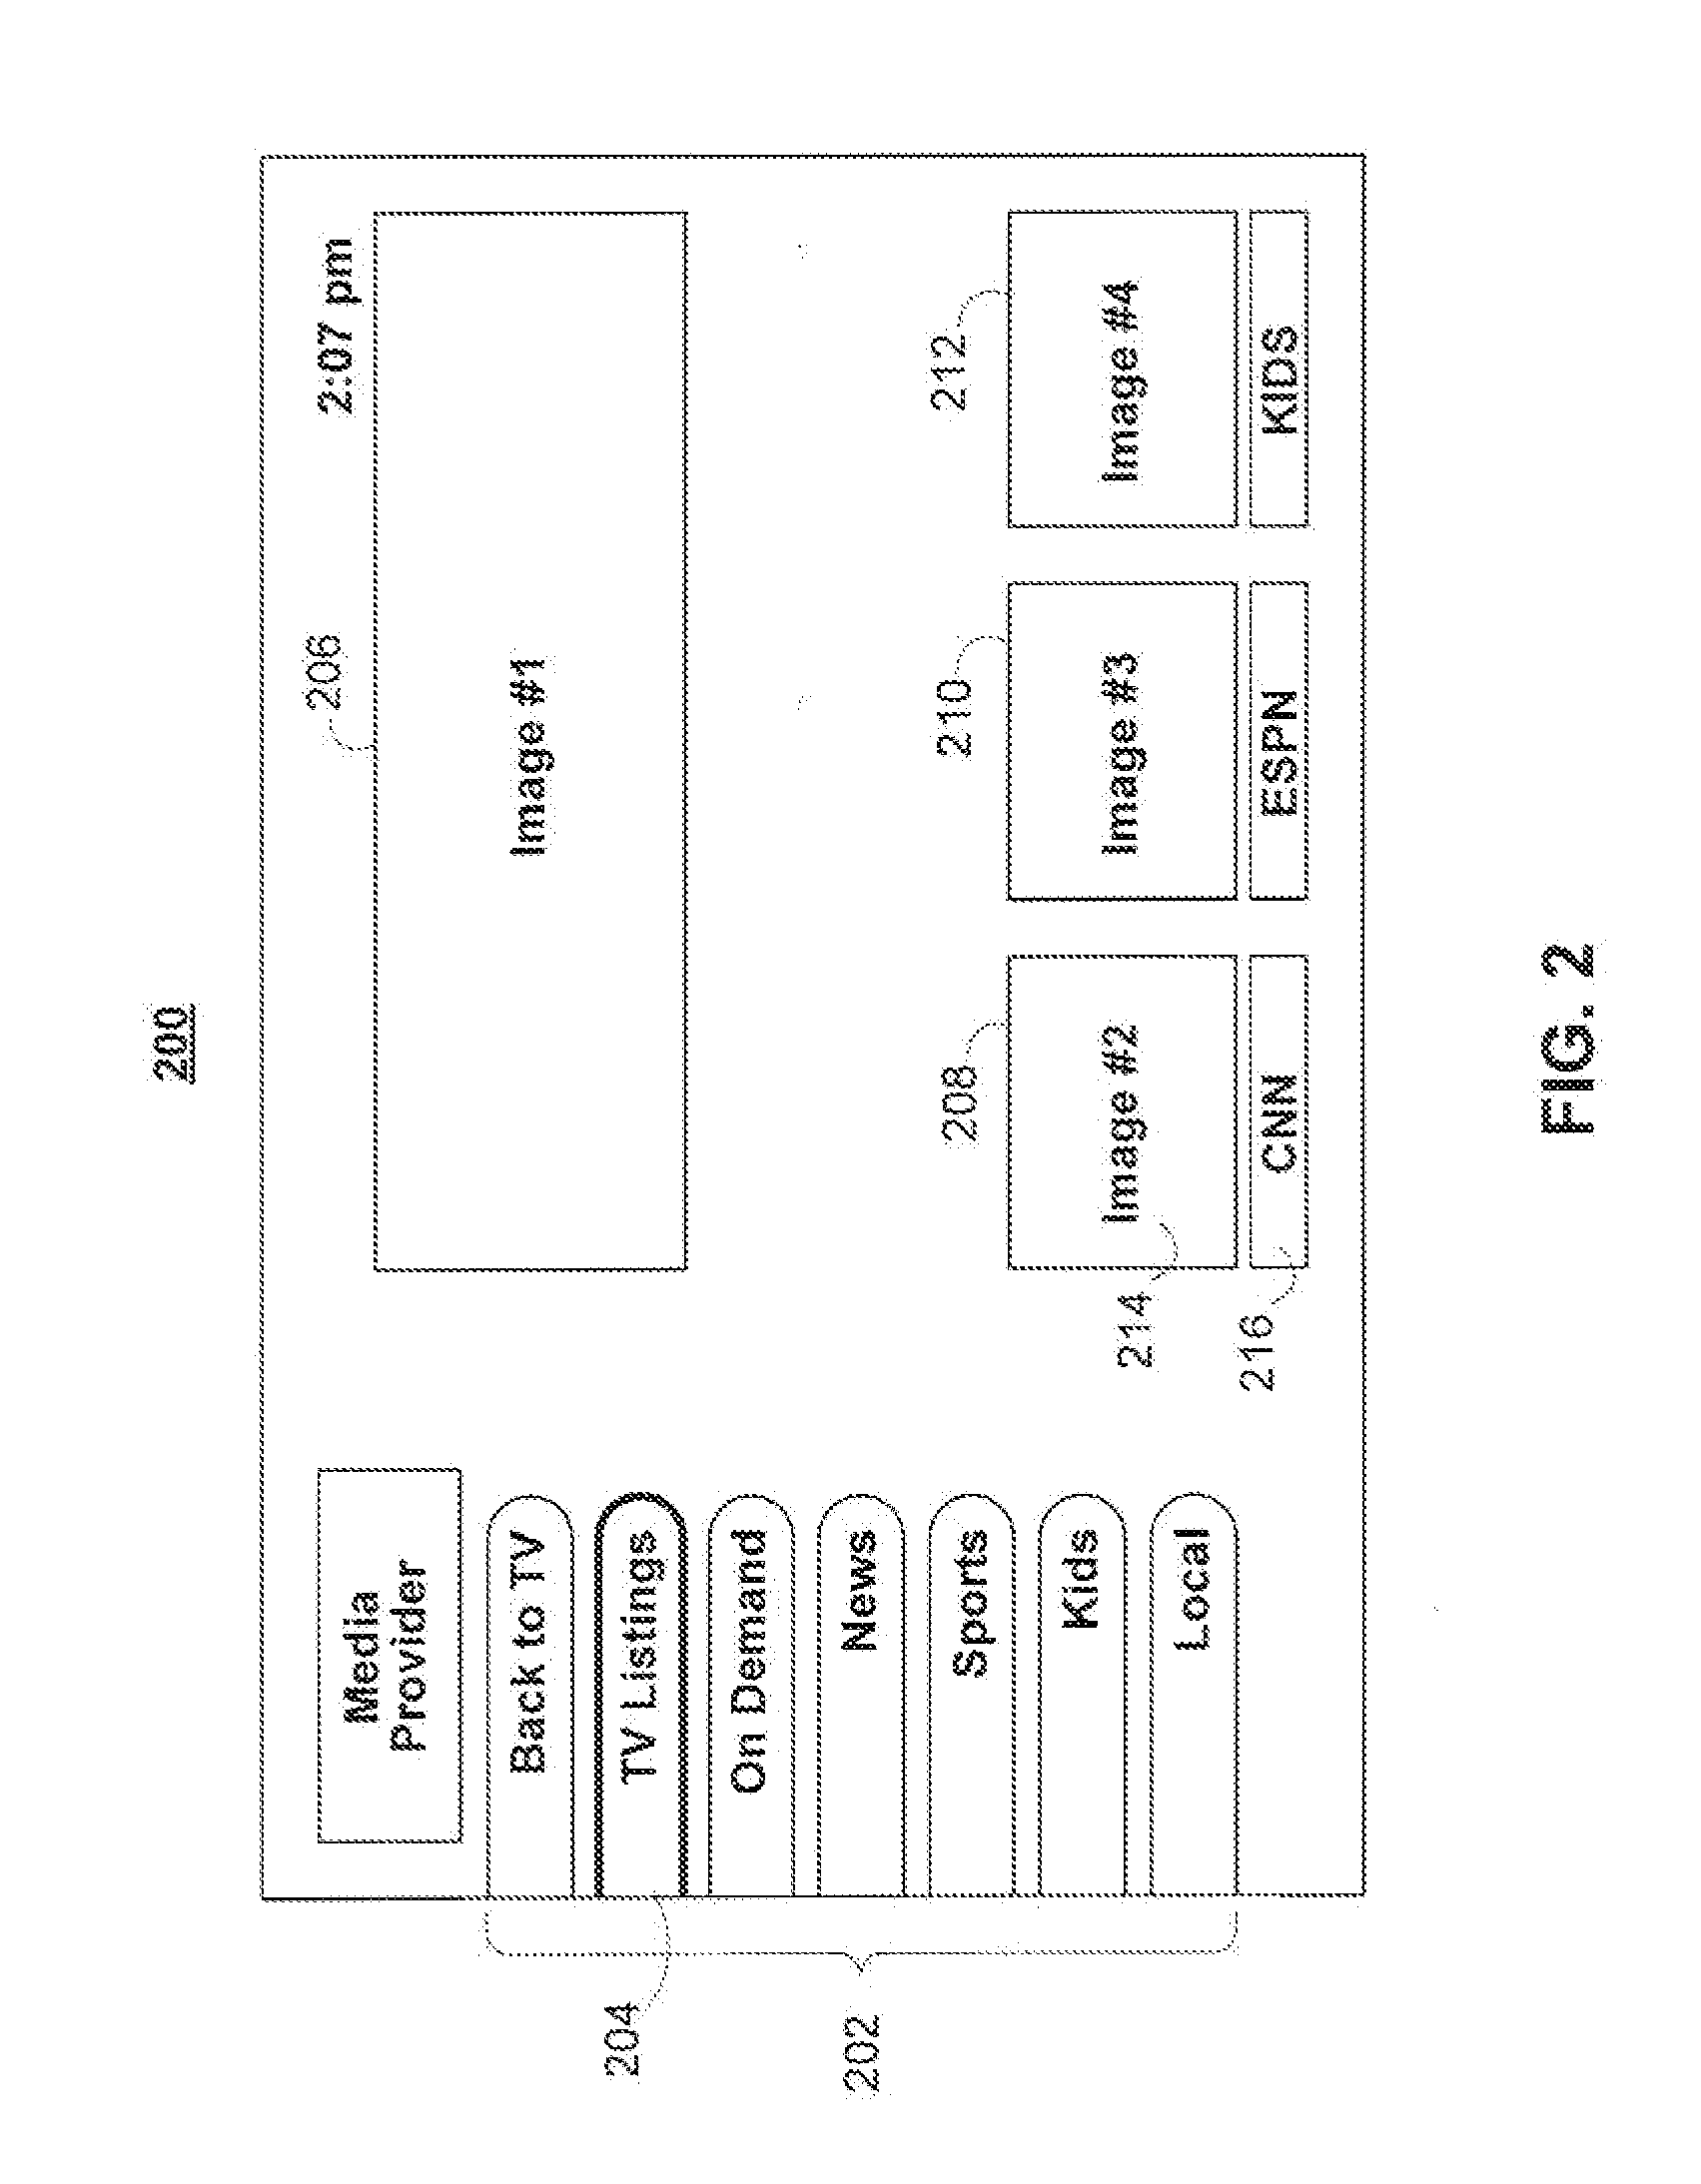 Systems and methods for automatically detecting users within detection regions of media devices